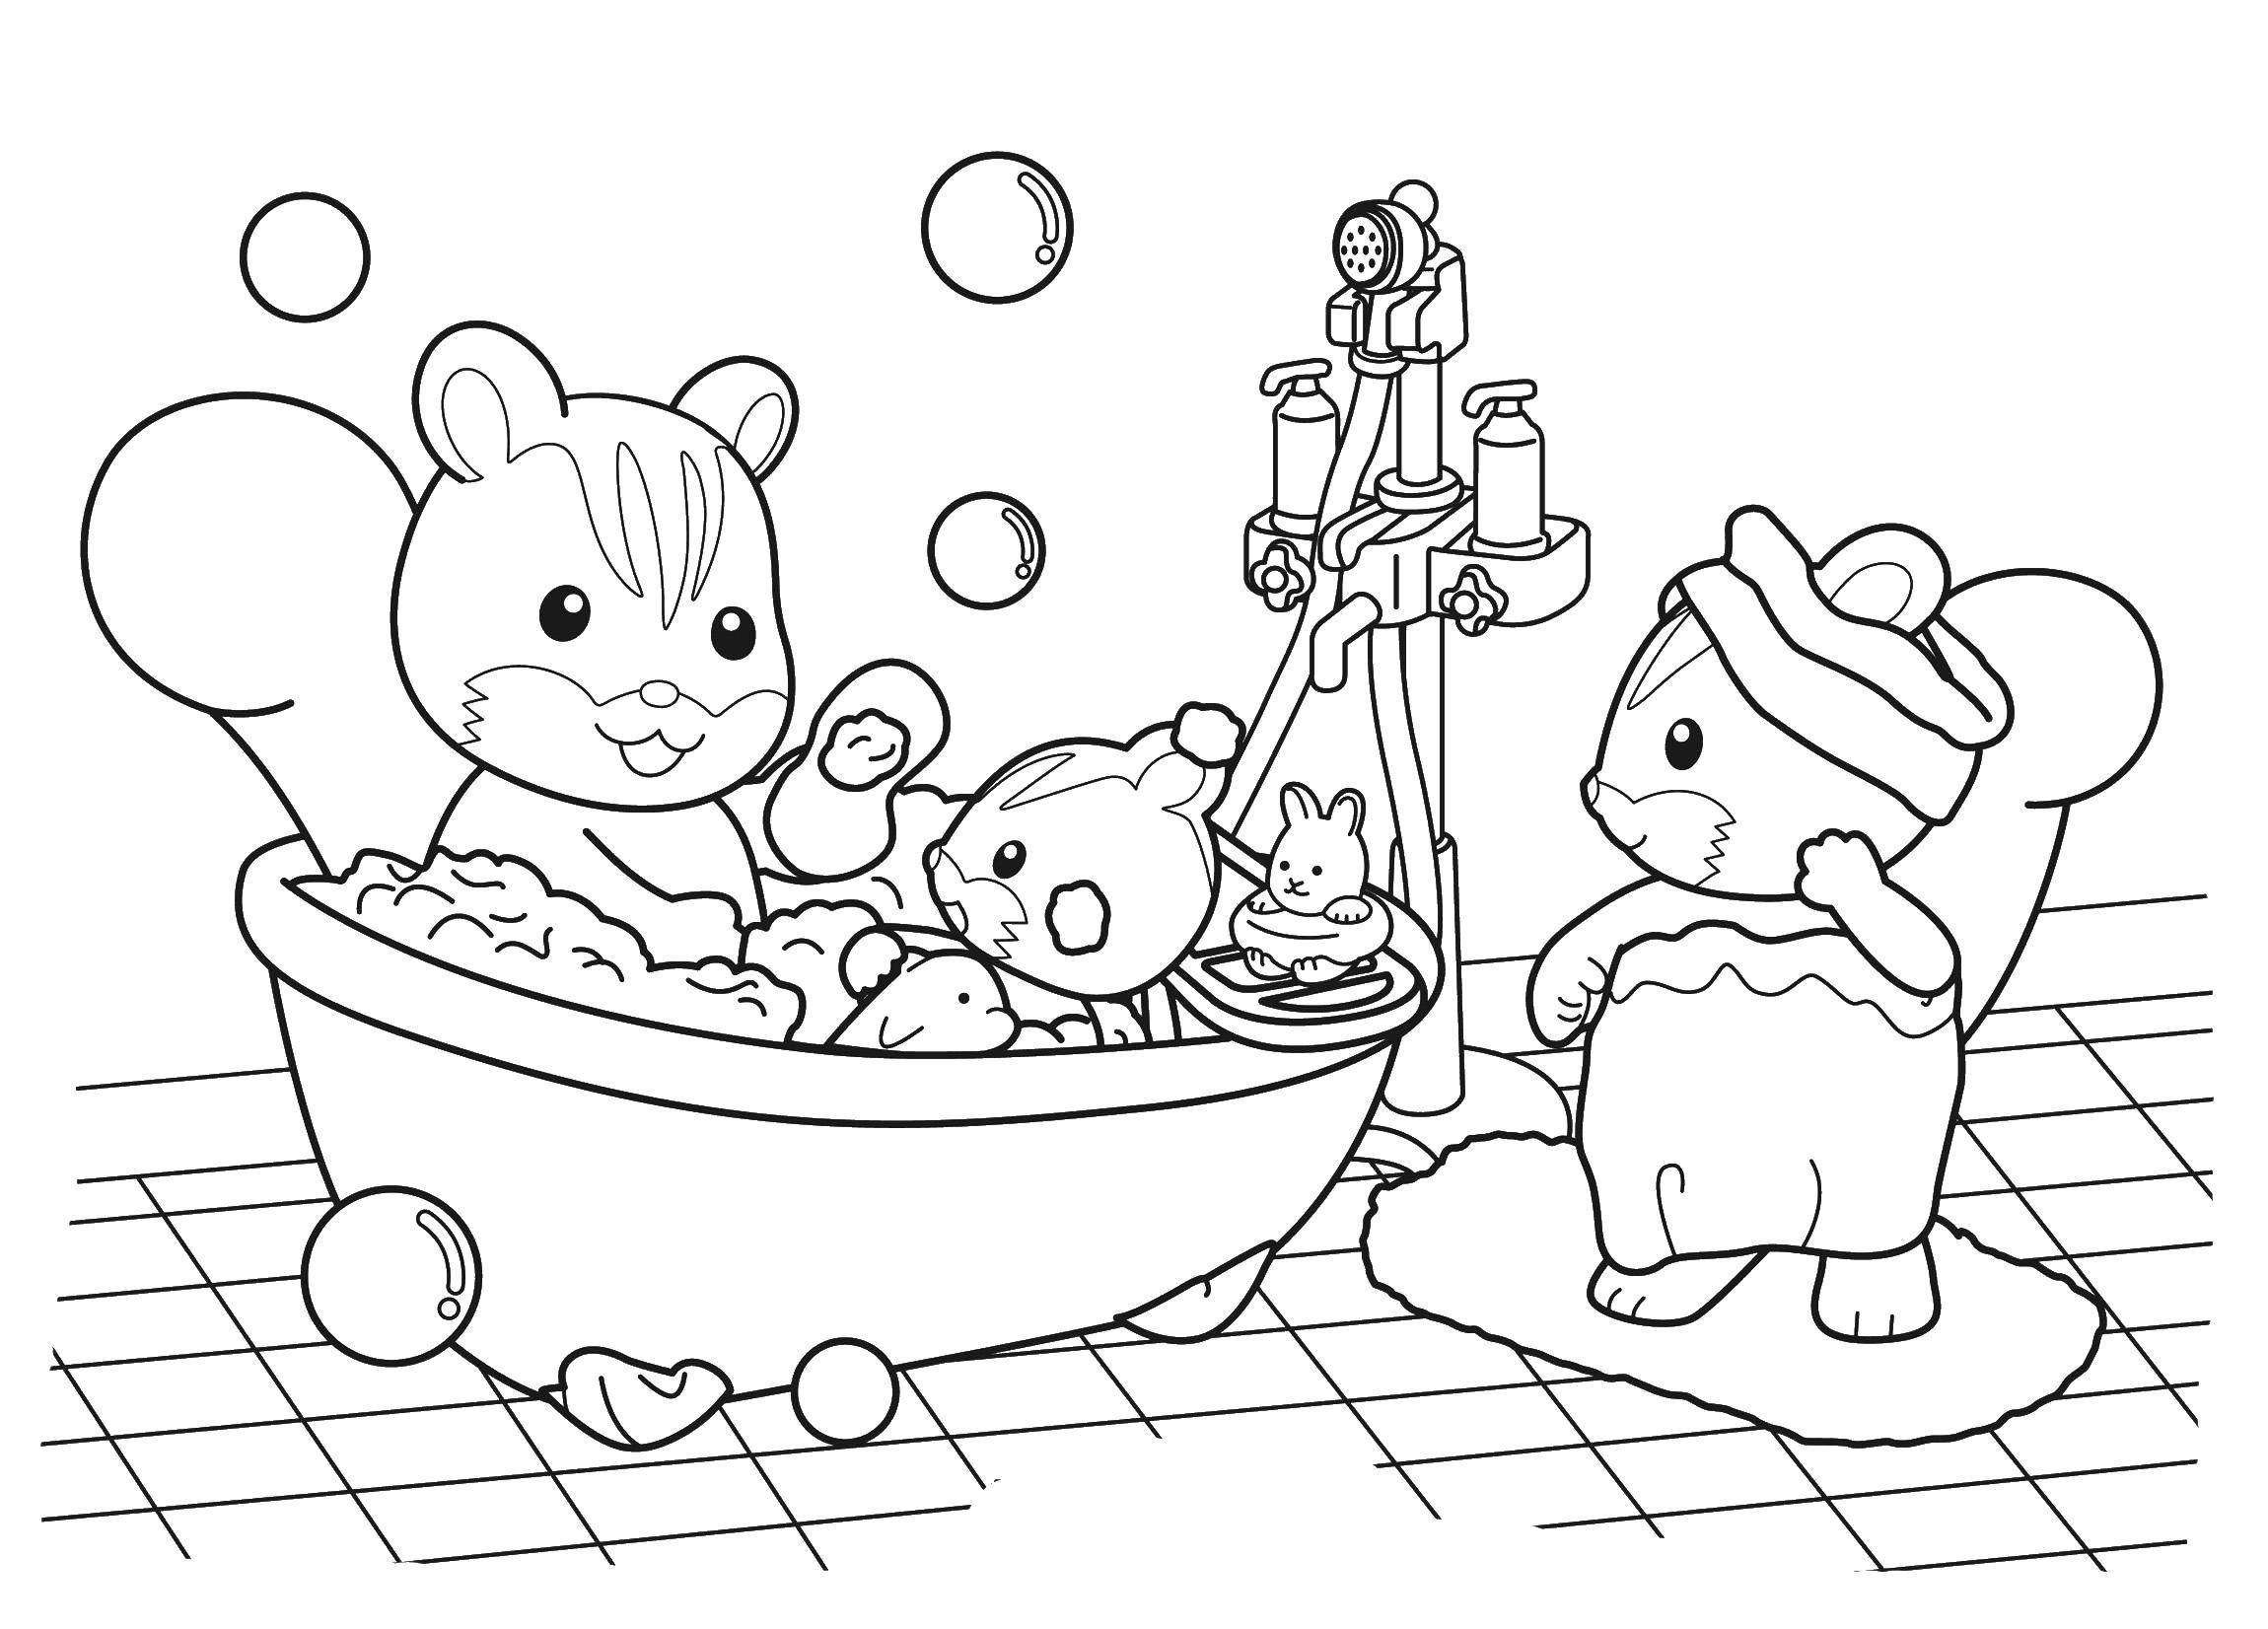 Coloring Animals bathe. Category family animals. Tags:  The animals.